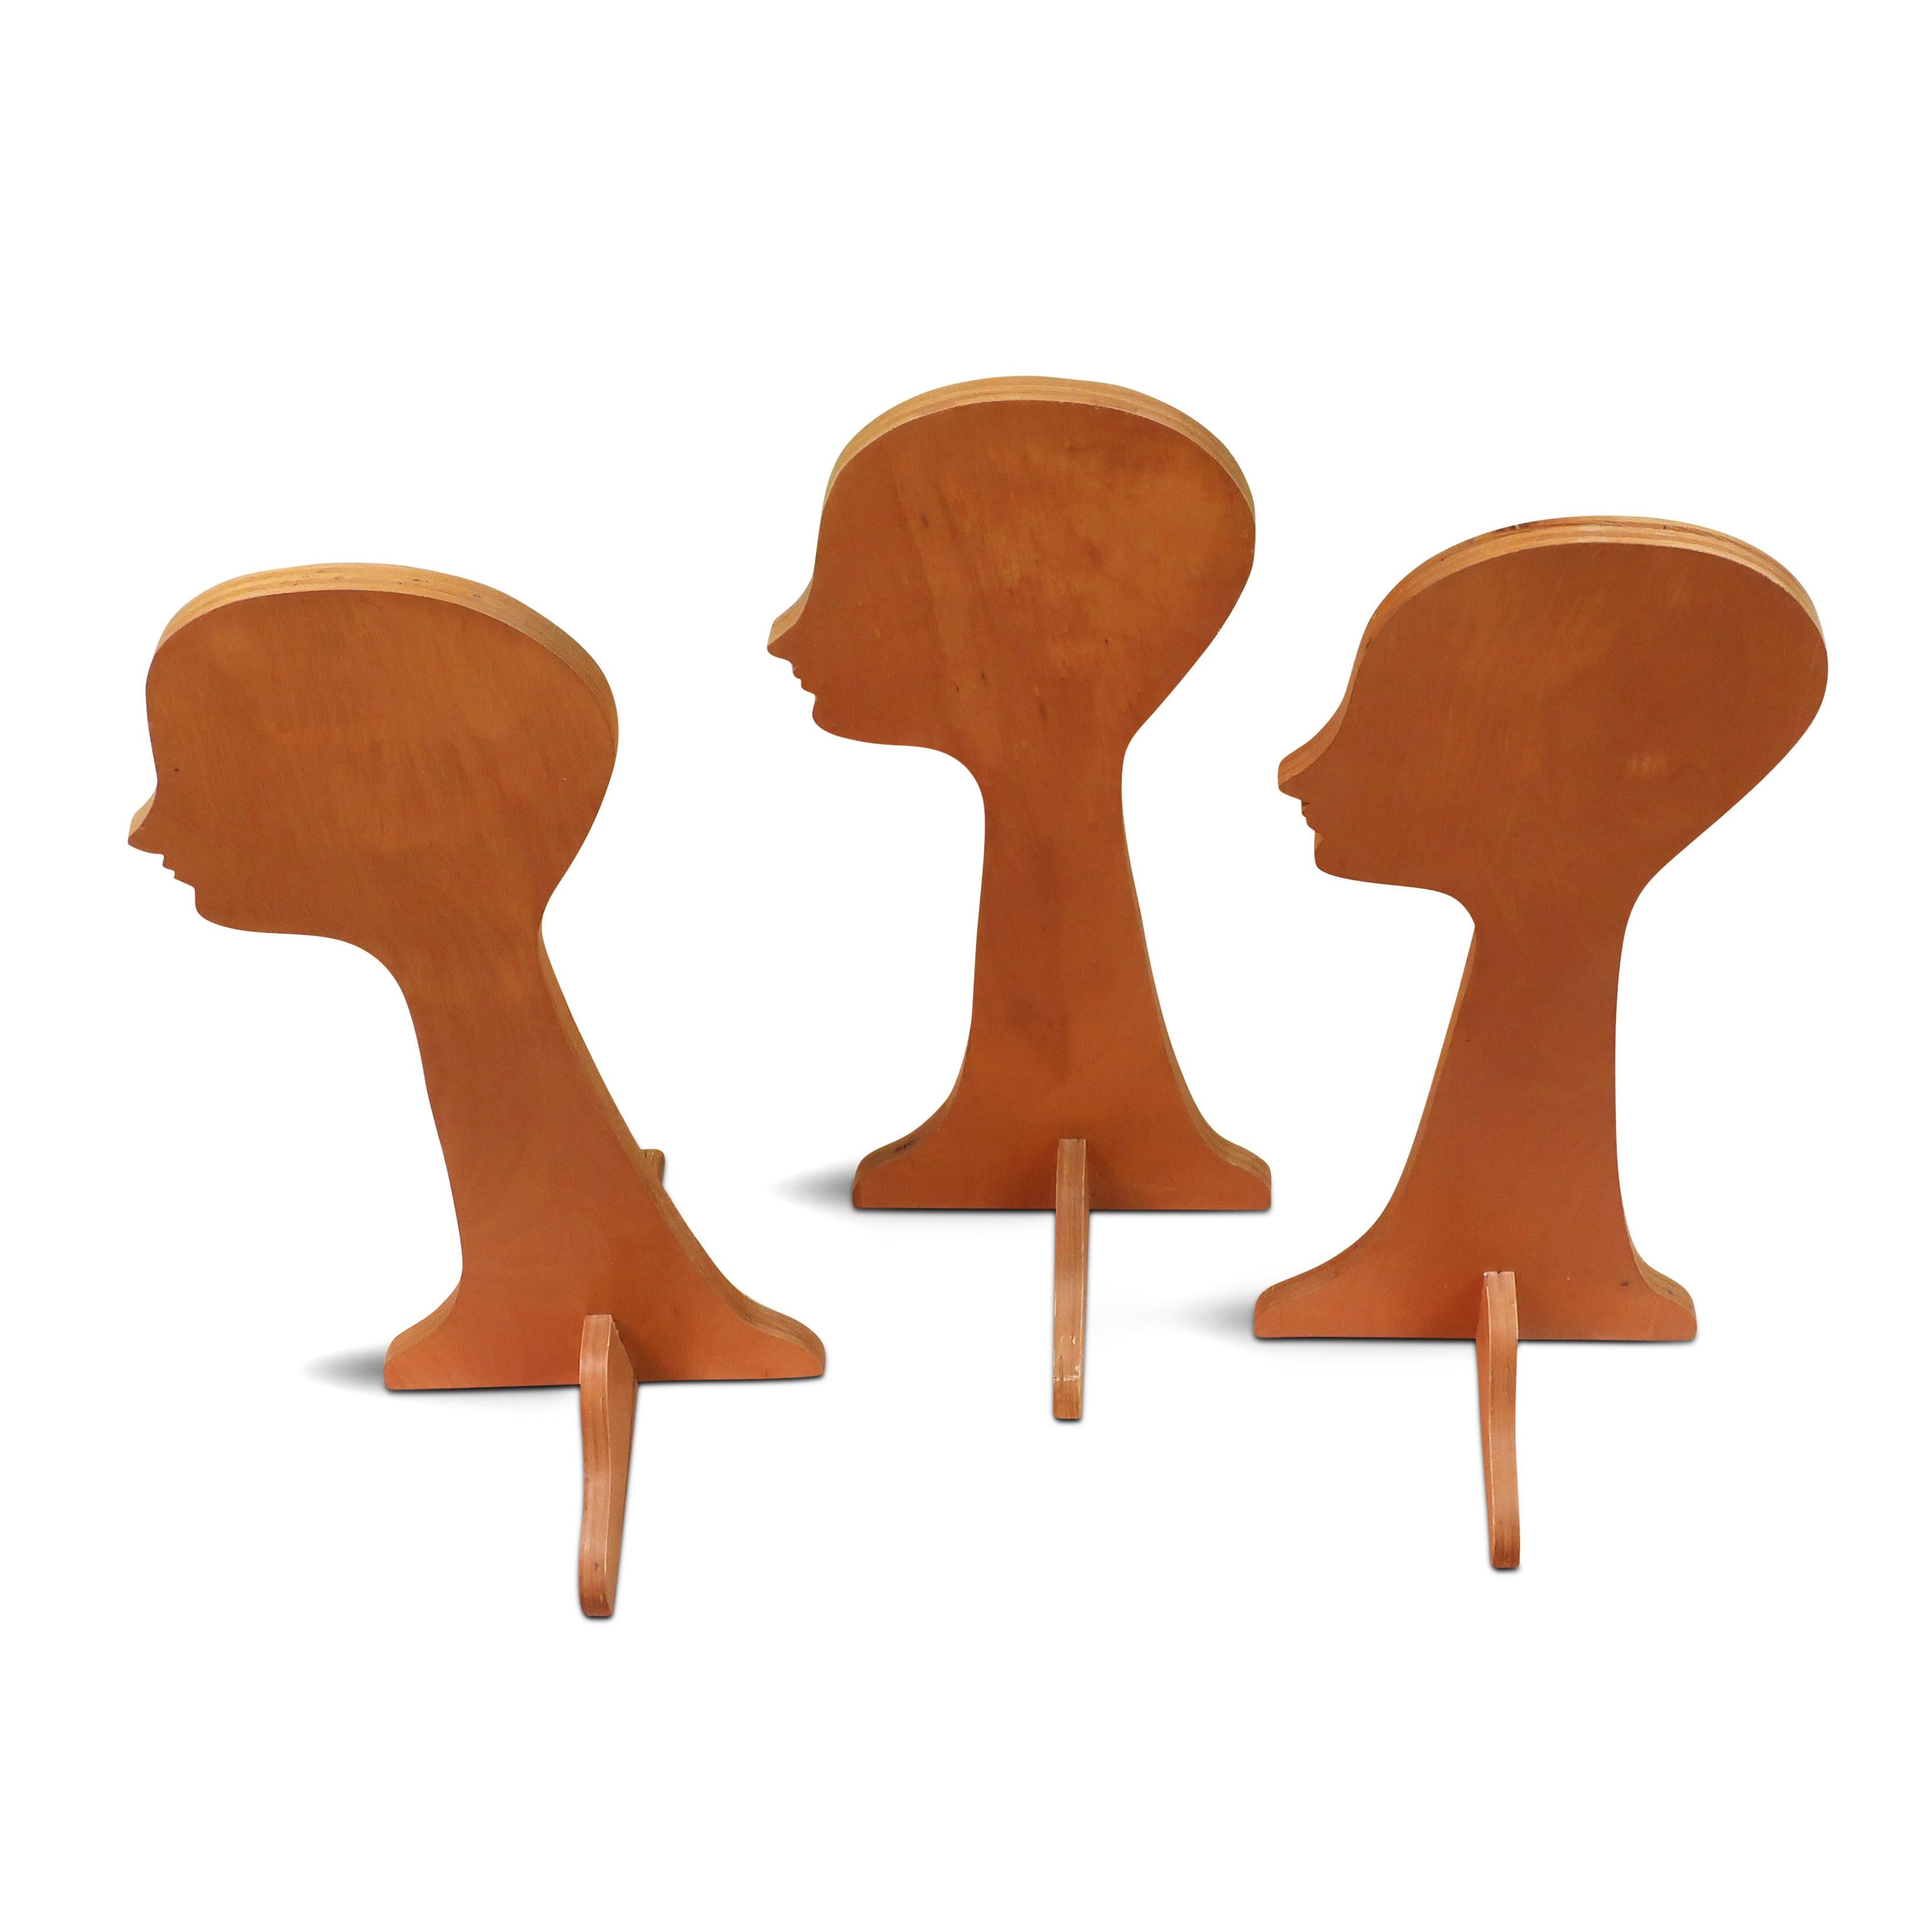 A set of three vintage mid-century handmade hat stands.  Constructed from plywood to resemble a head and face in silhouette, each sits on a plywood x-base.  Made for a Long Island, New York milliner in the 1940s or 1950s to display their wares and